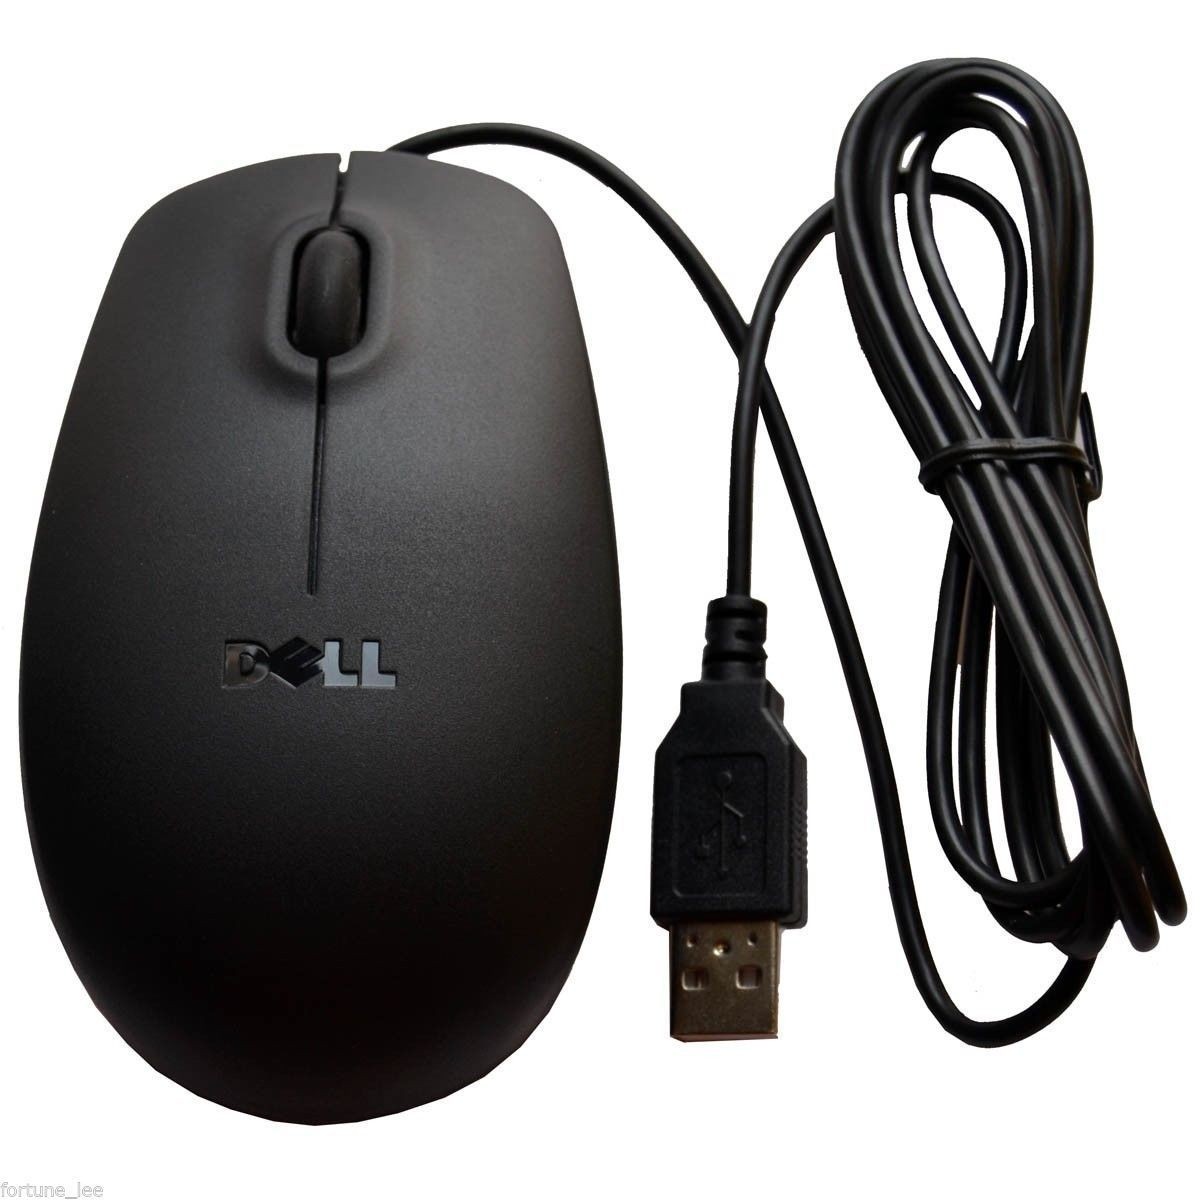 Dell Optical Mouse - USB New